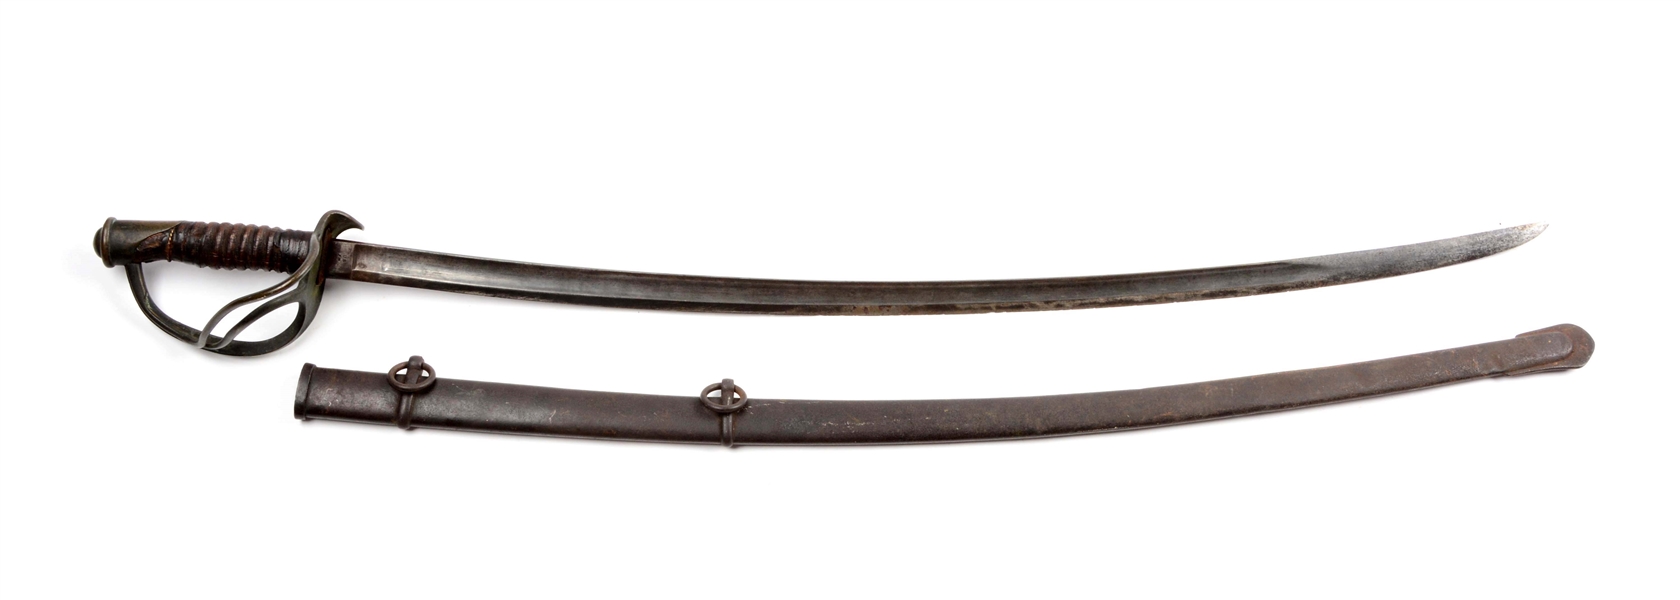 EARLY U.S. MODEL 1860 CAVALRY SABER BY AMES.